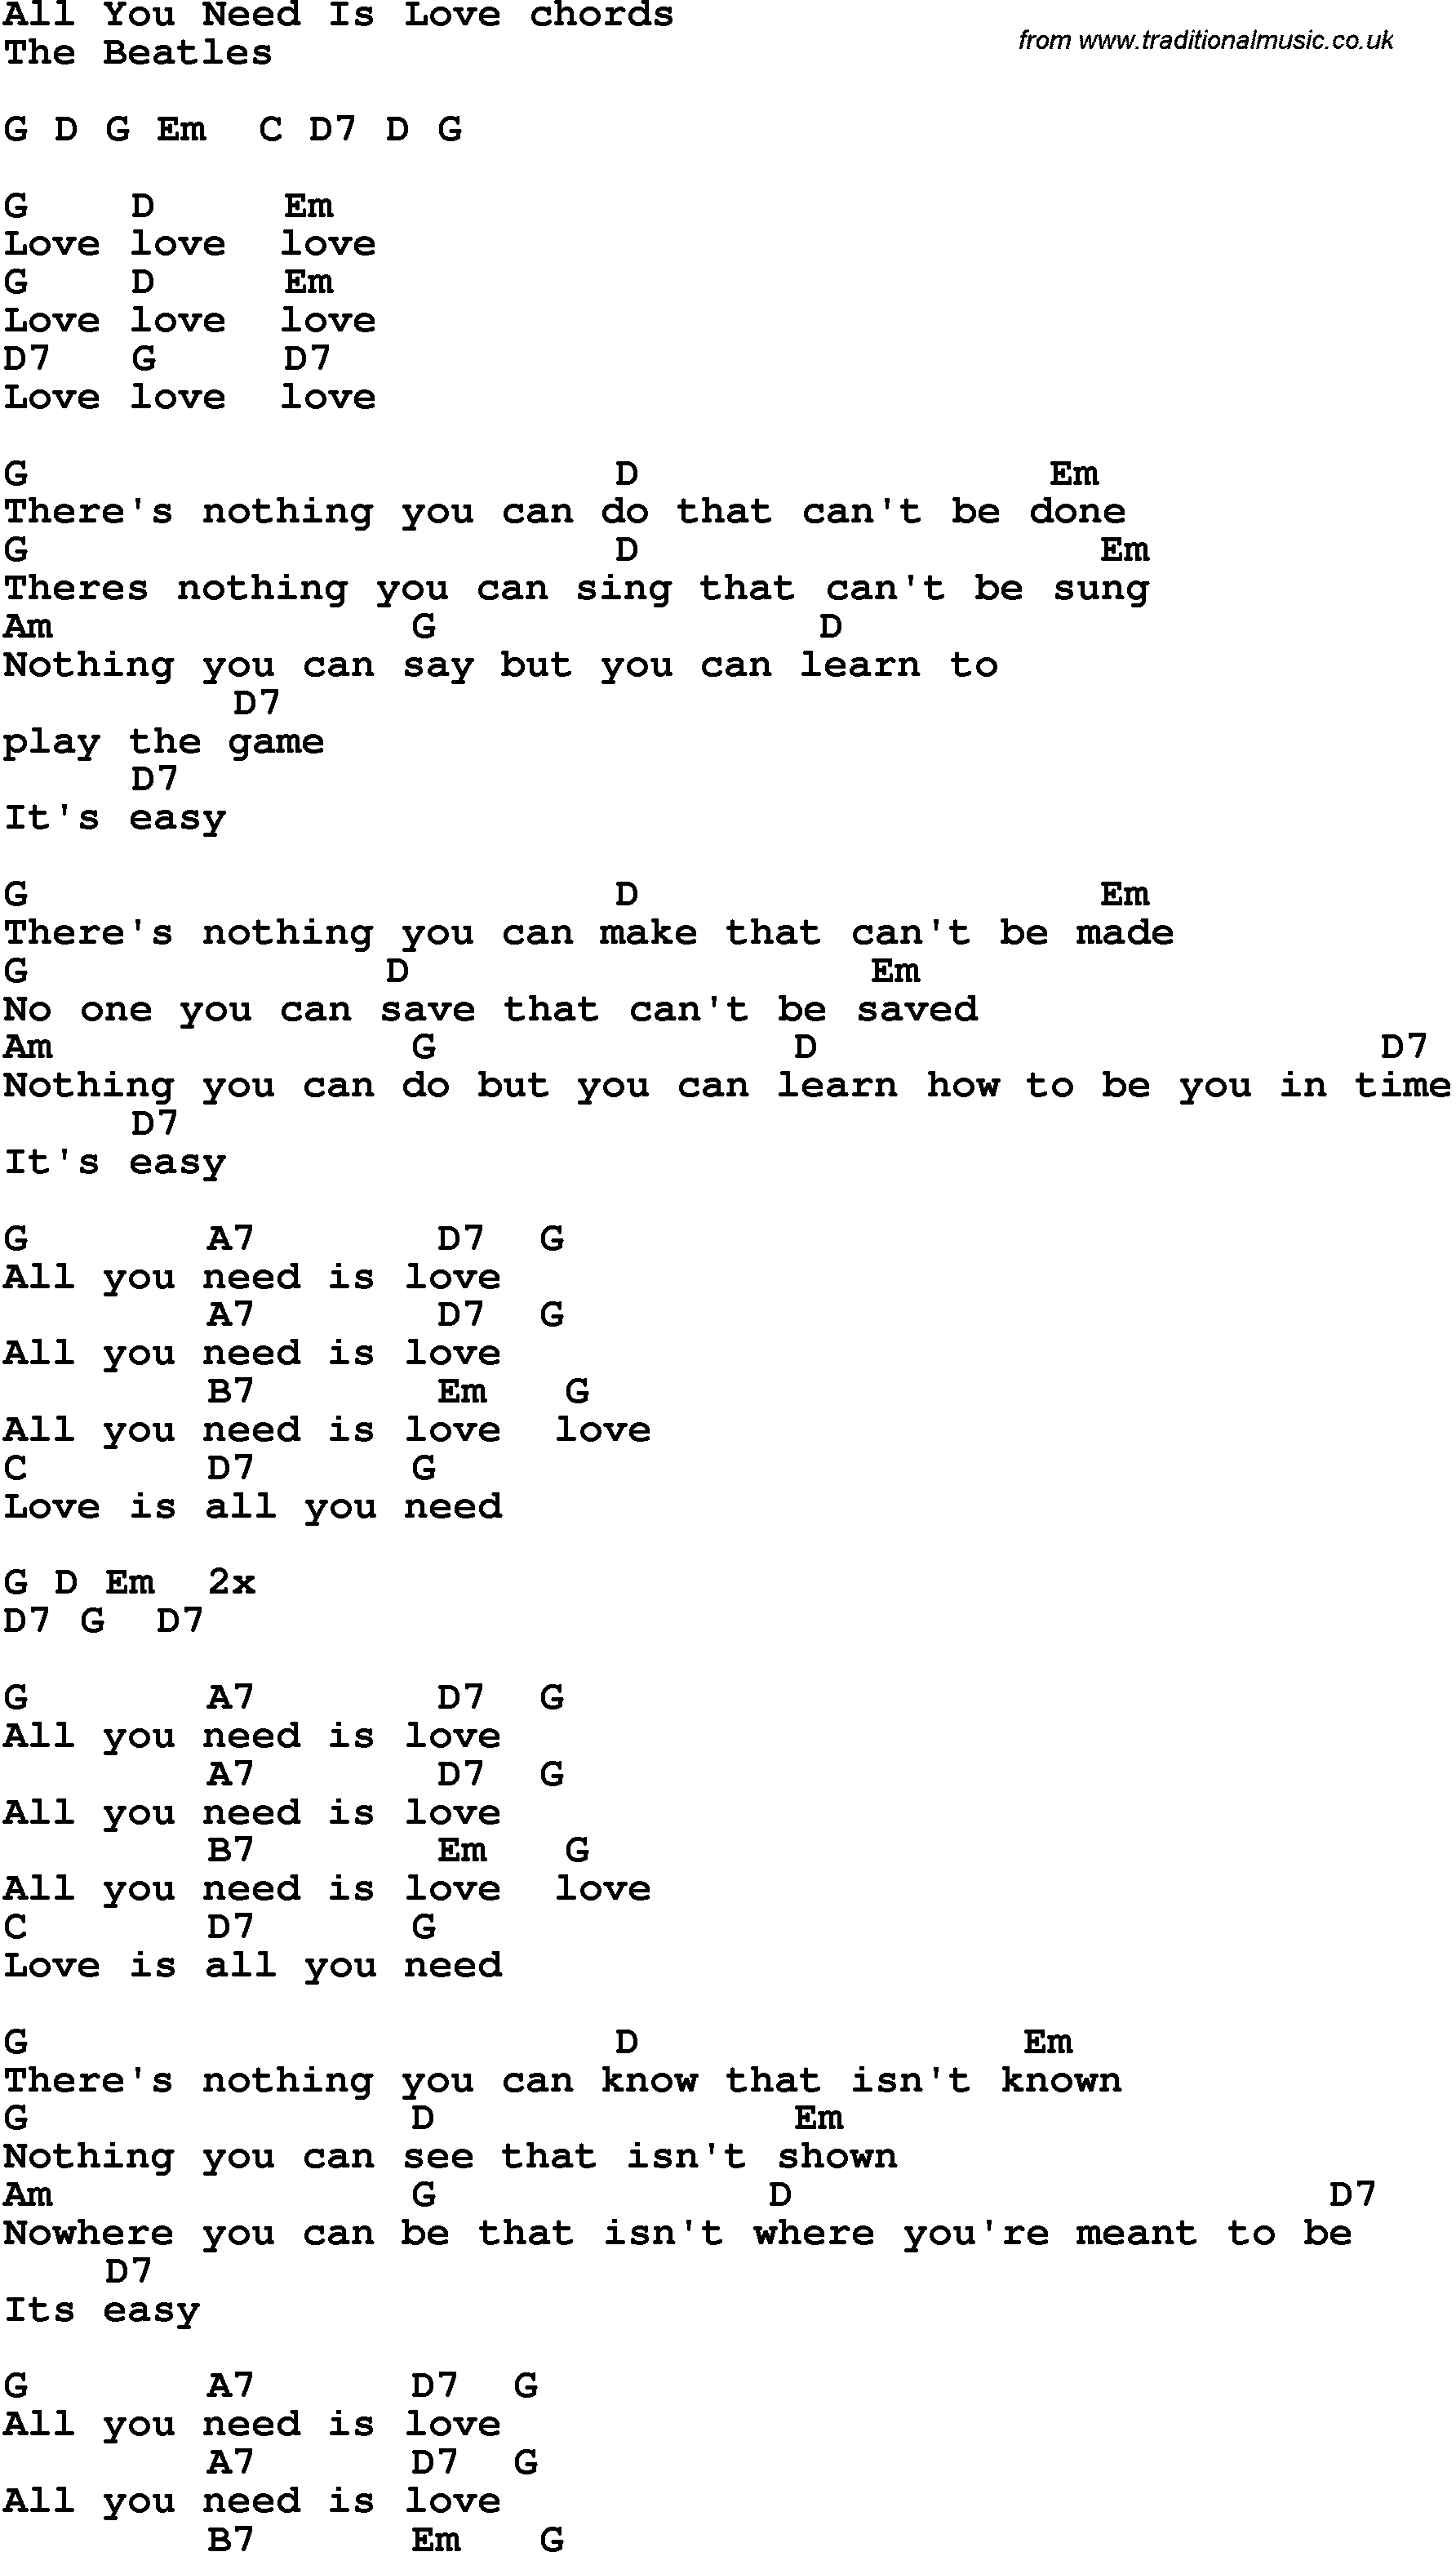 Song Lyrics with guitar chords for All You Need Is Love